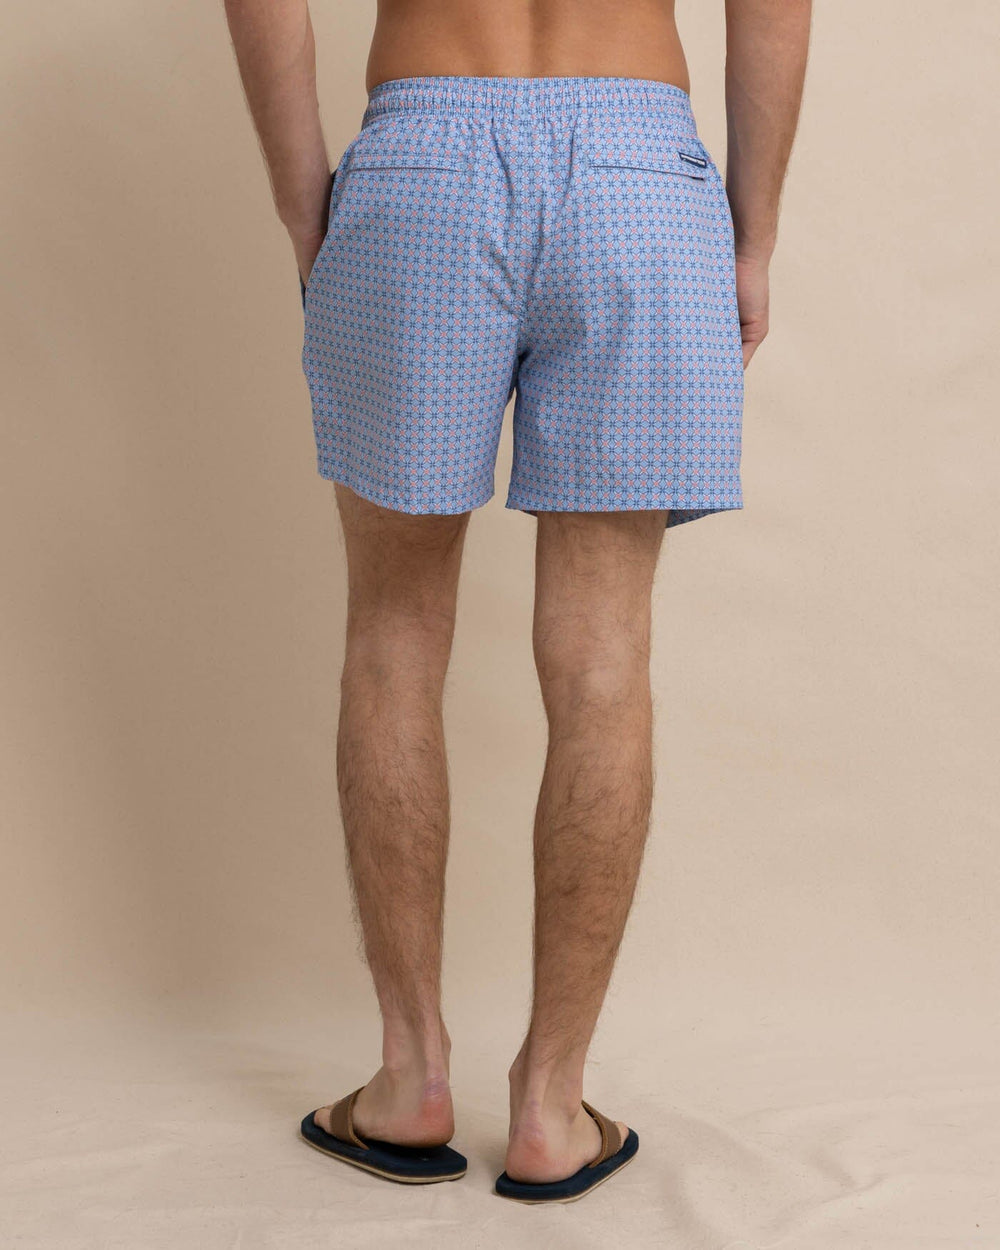 The back view of the Southern Tide White Lotus Swim Trunk by Southern Tide - Clearwater Blue